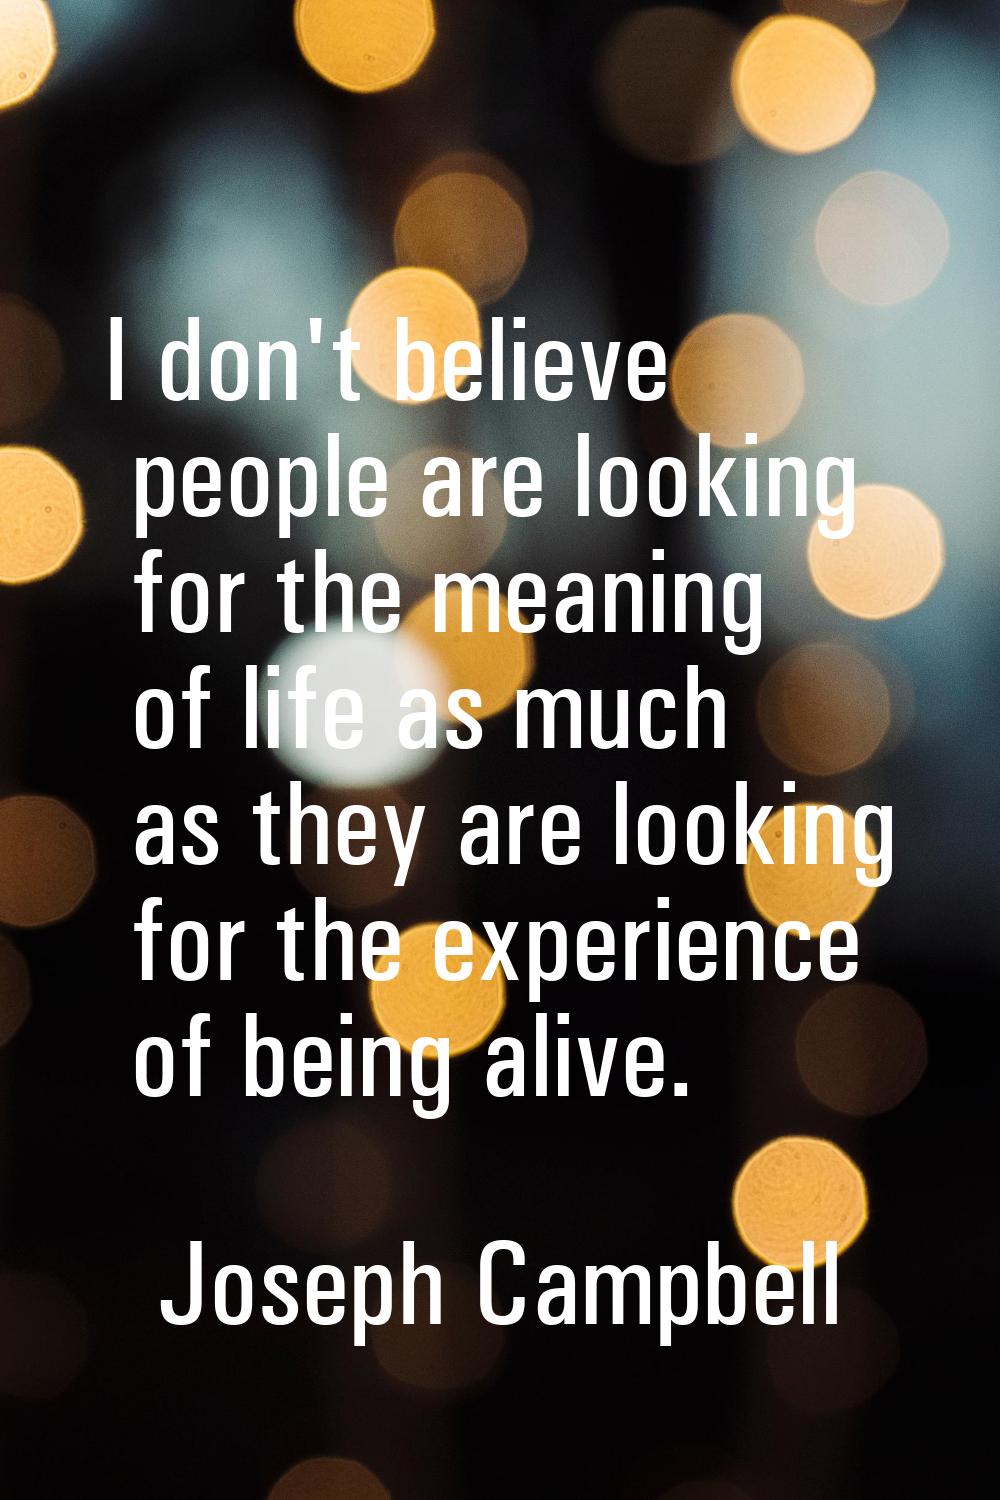 I don't believe people are looking for the meaning of life as much as they are looking for the expe